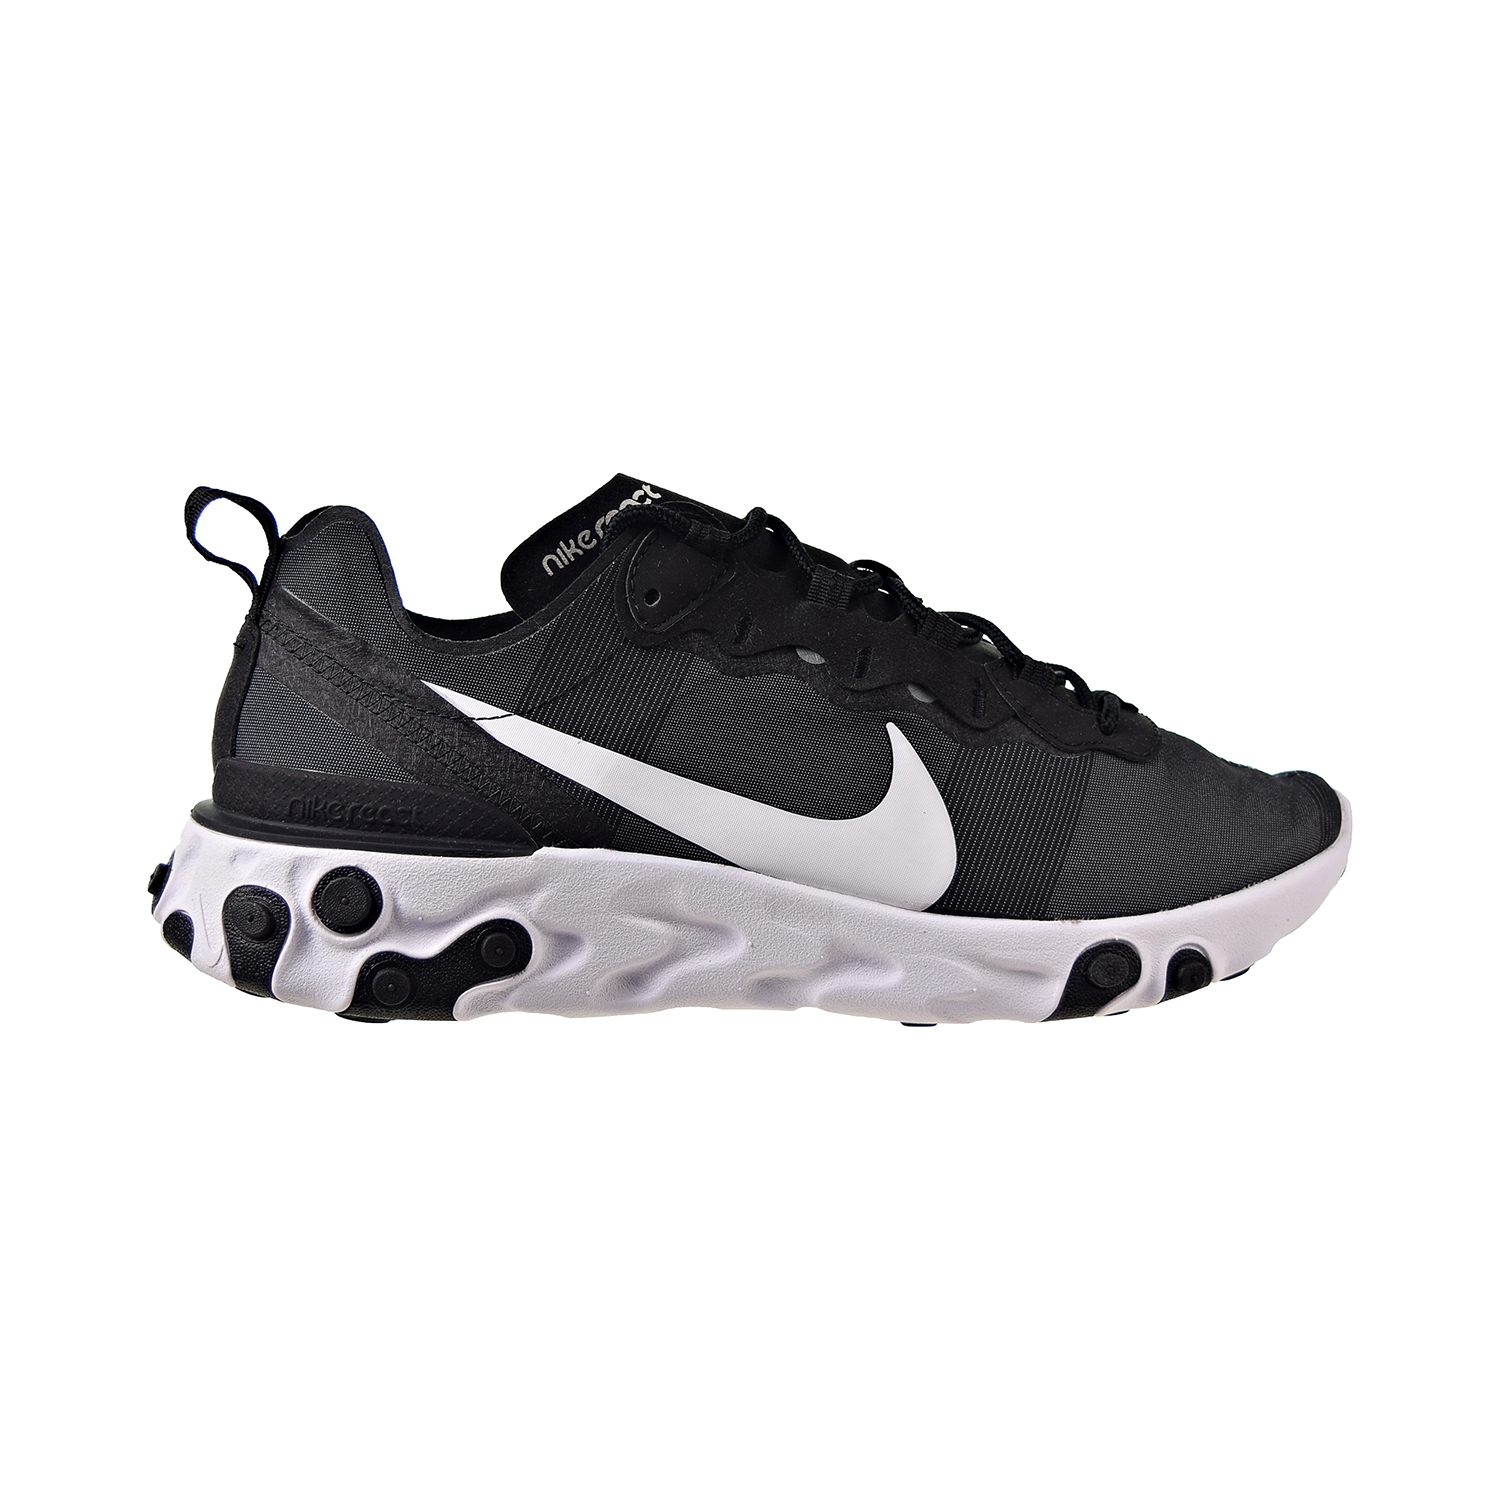 nike react element 55 mens trainers